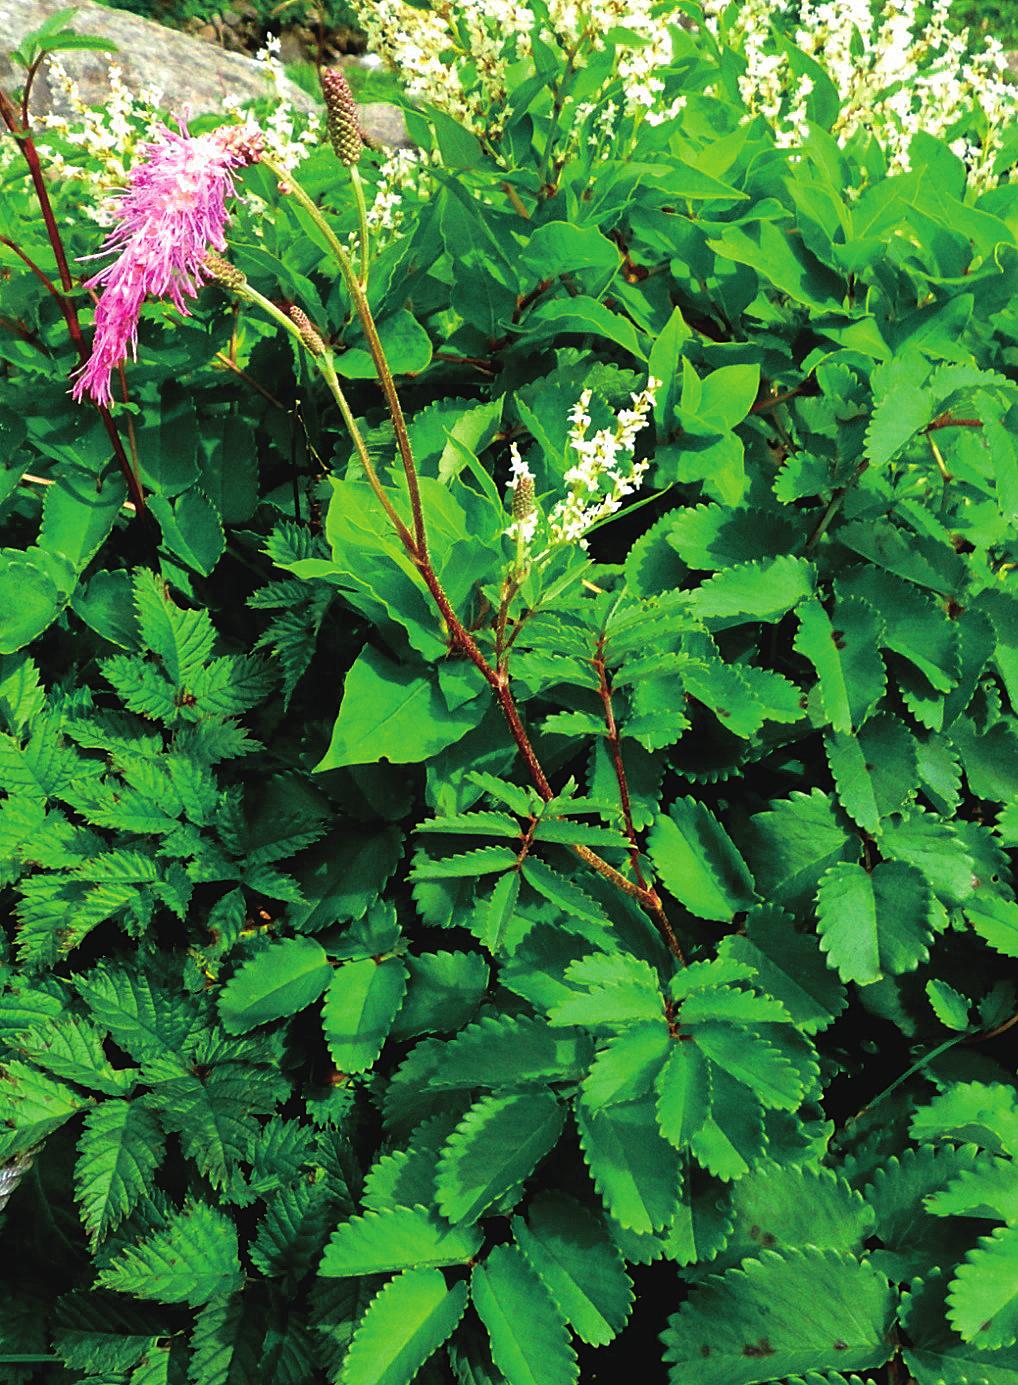 144 Yoshinori Murai and Tsukasa Iwashina Materials and Methods Plant materials Sanguisorba obtusa (Fig. 1) was collected from Mt. Hayachine, Iwate Prefecture, Japan in August 2014.